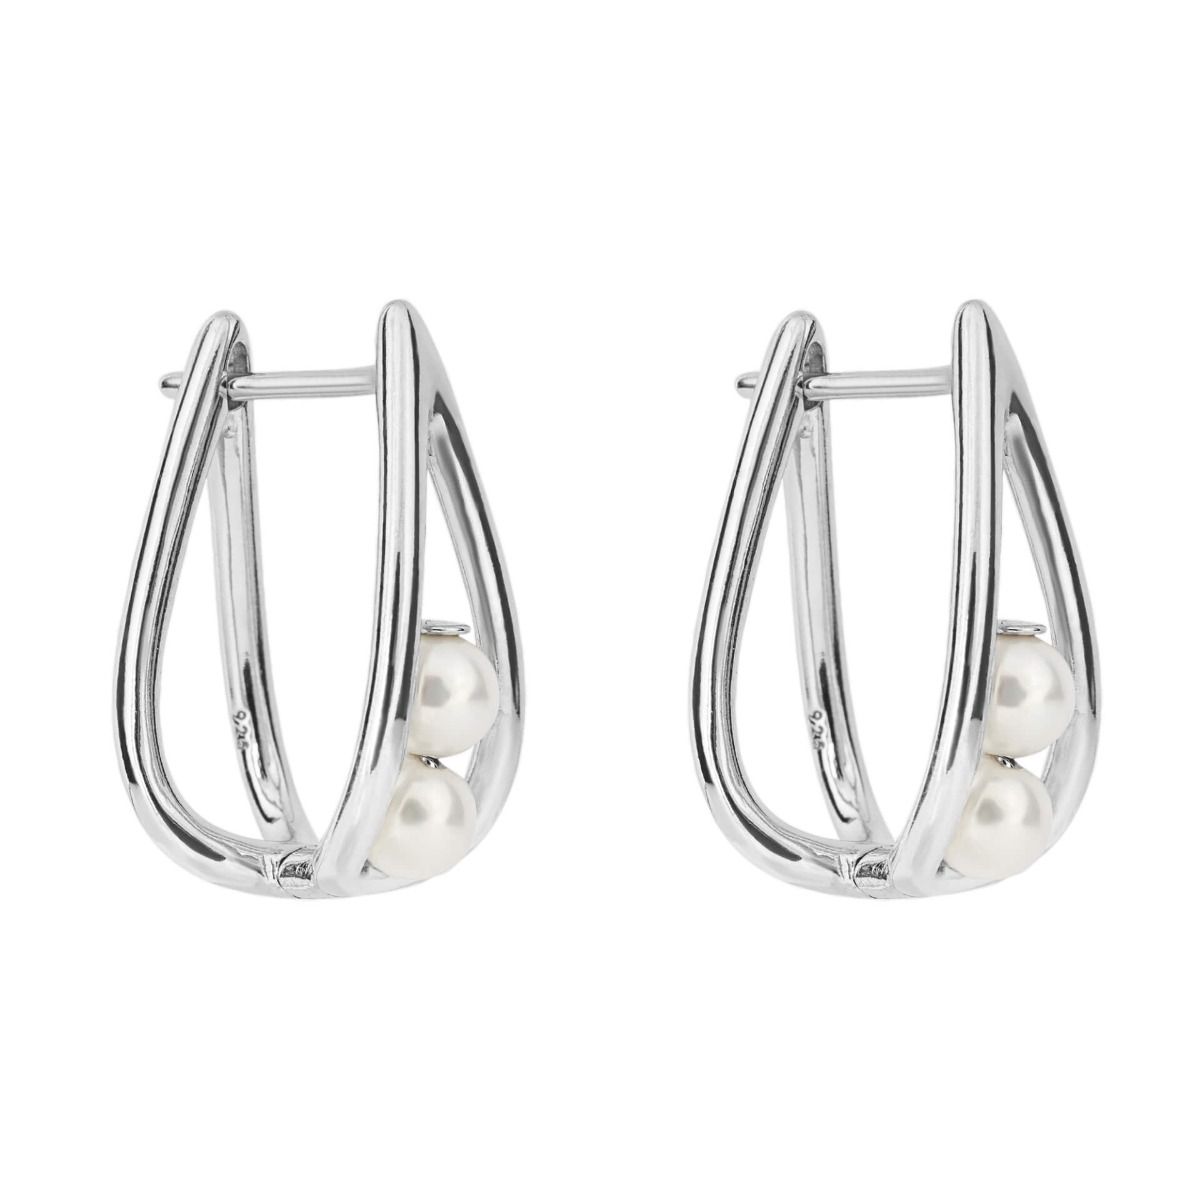 Fiorelli silver and shell pearl hoop earrings